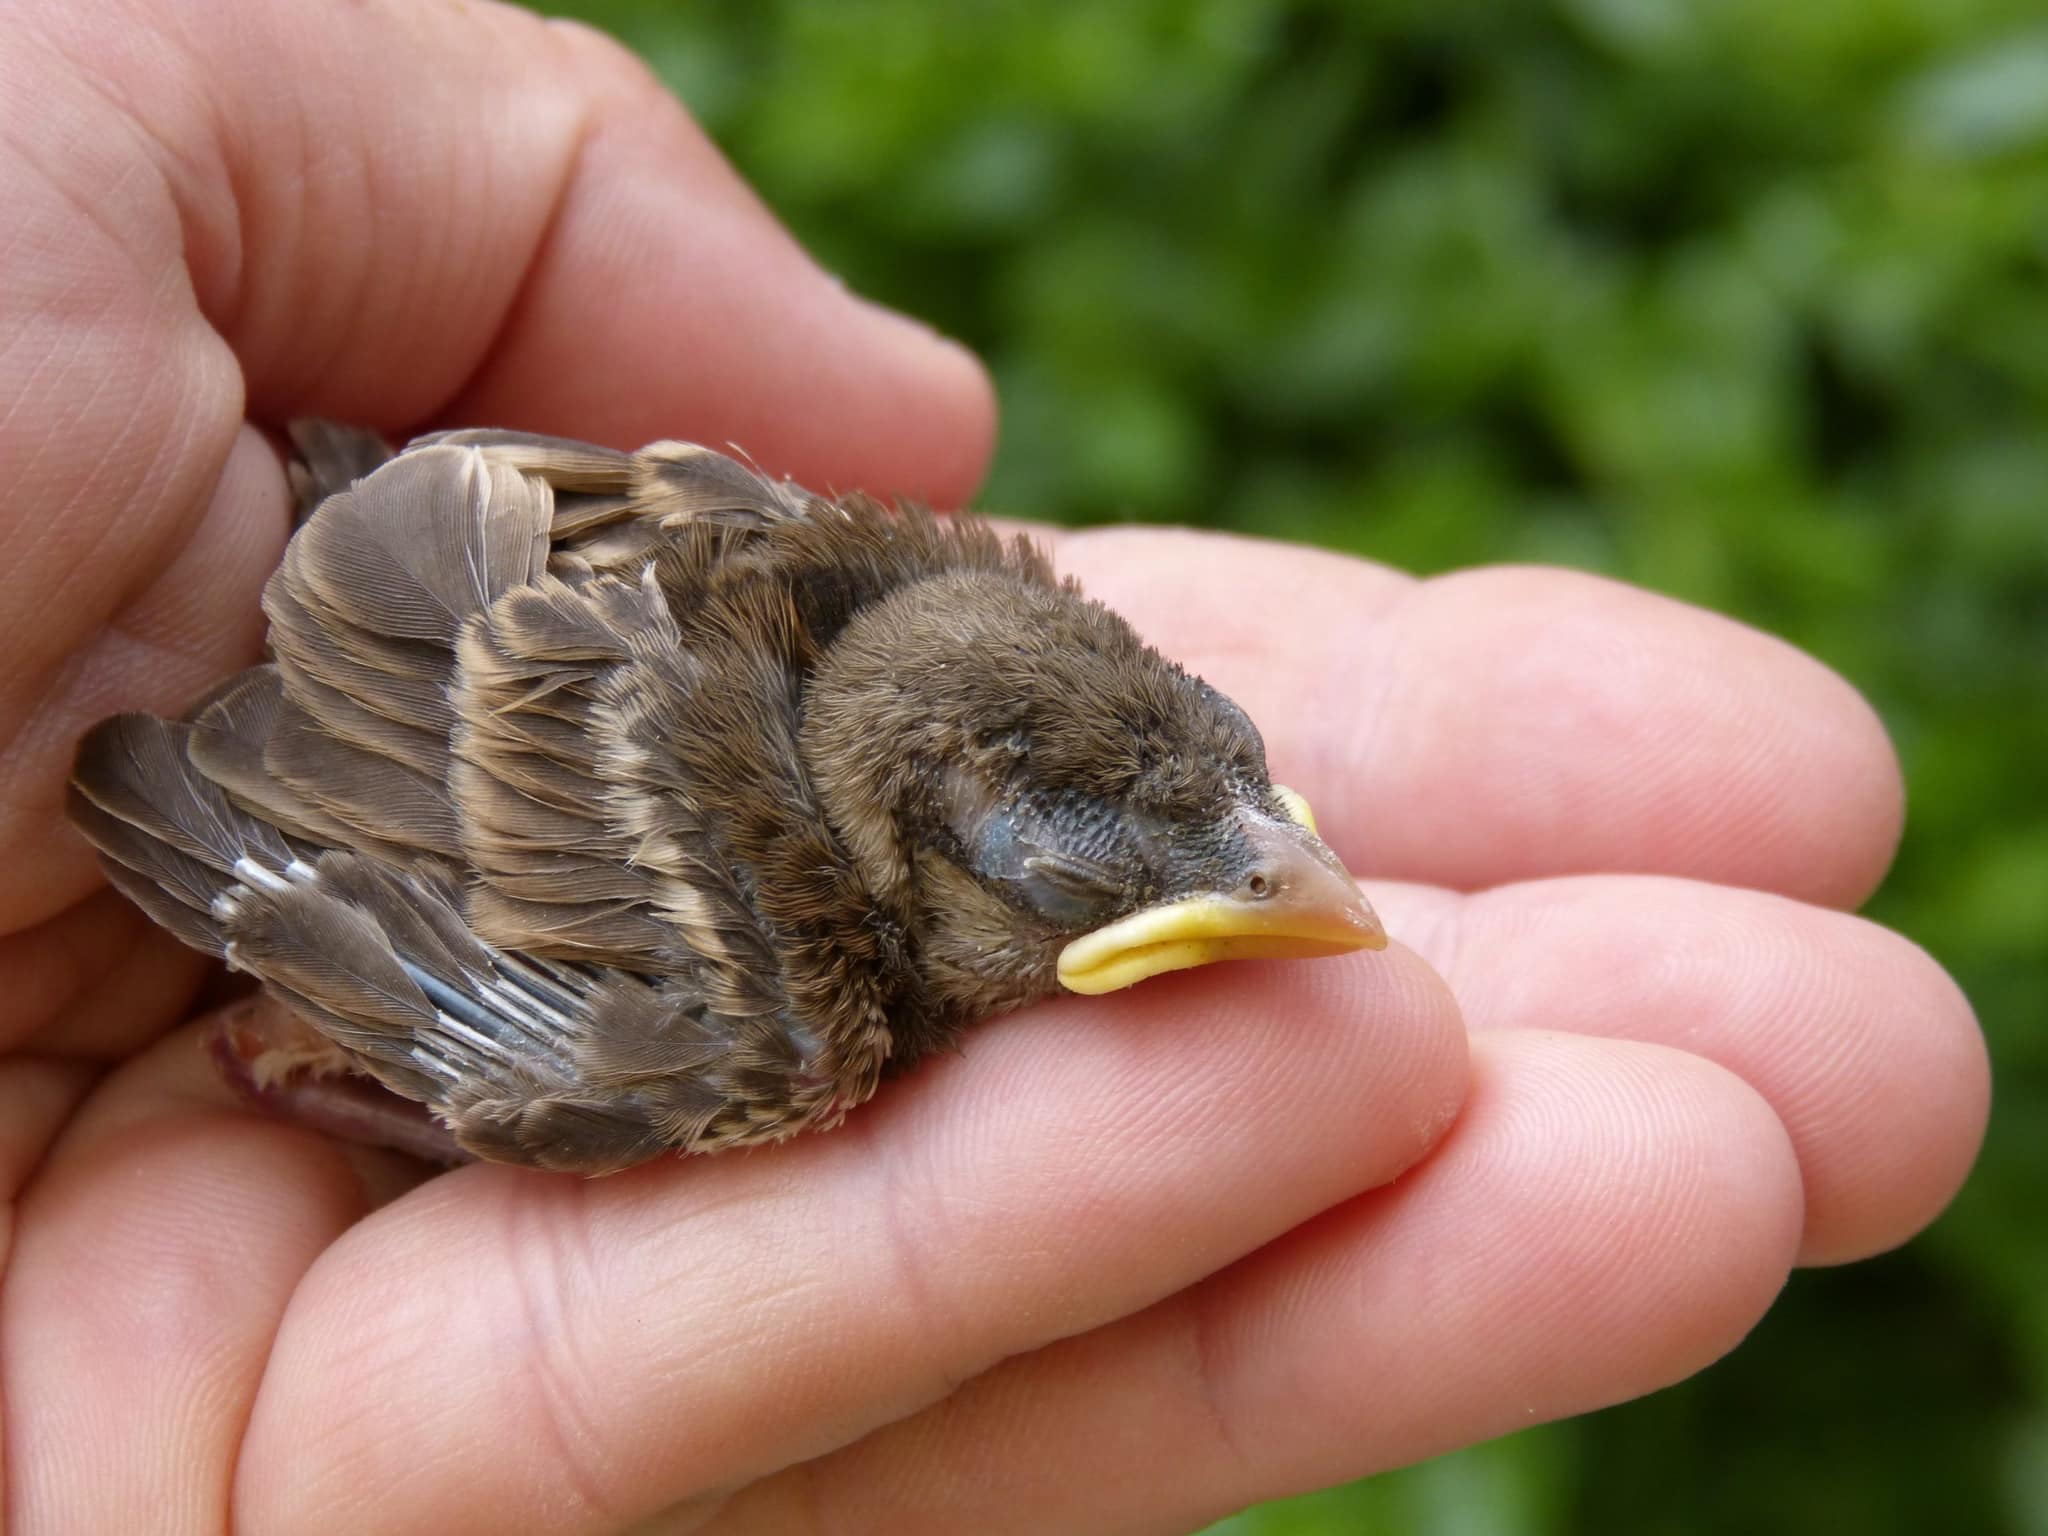 Fledgling in a hand